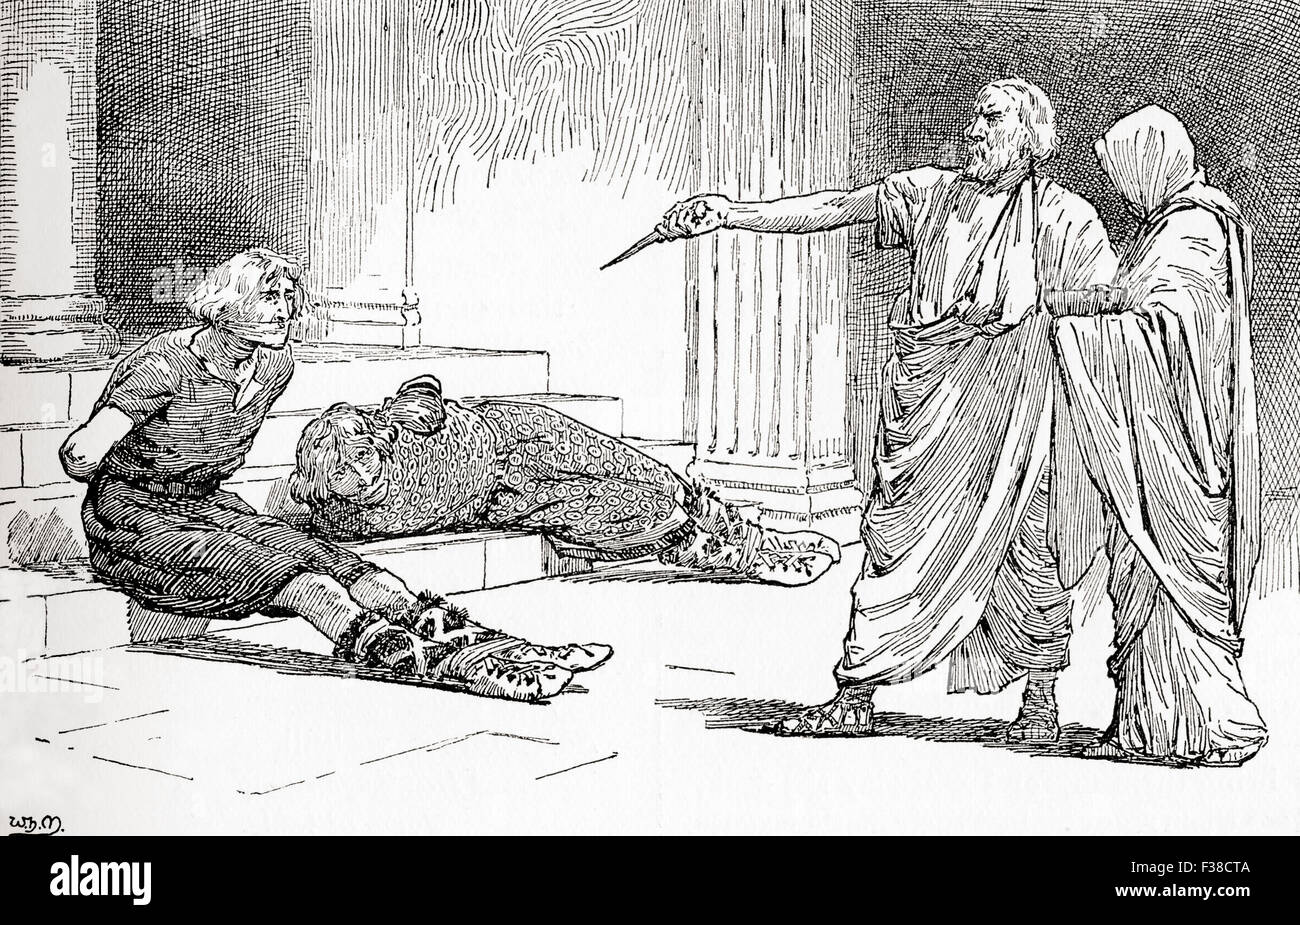 A scene from William Shakespeare's play Titus Andronicus.  Act V, scene 2. Titus: "Come, come, Lavinia, look, thy foes are bound."   Illustration by Gordon Browne. Stock Photo